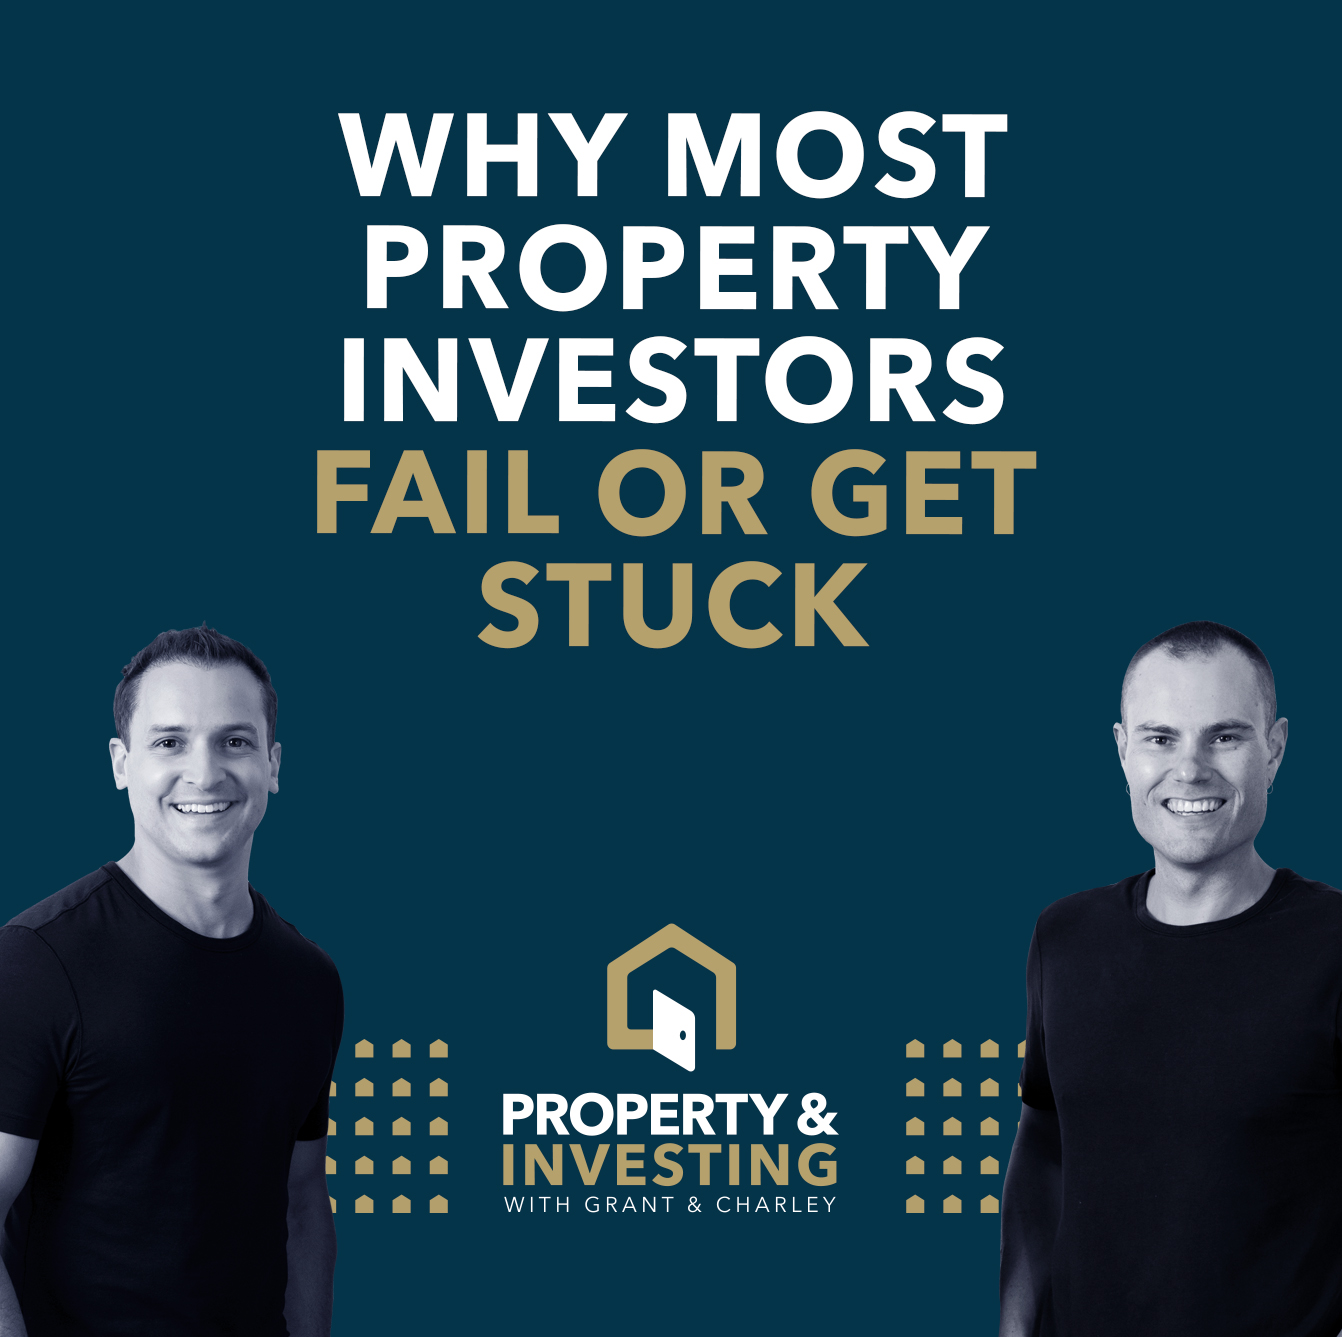 Why Most Property Investors Fail or Get Stuck